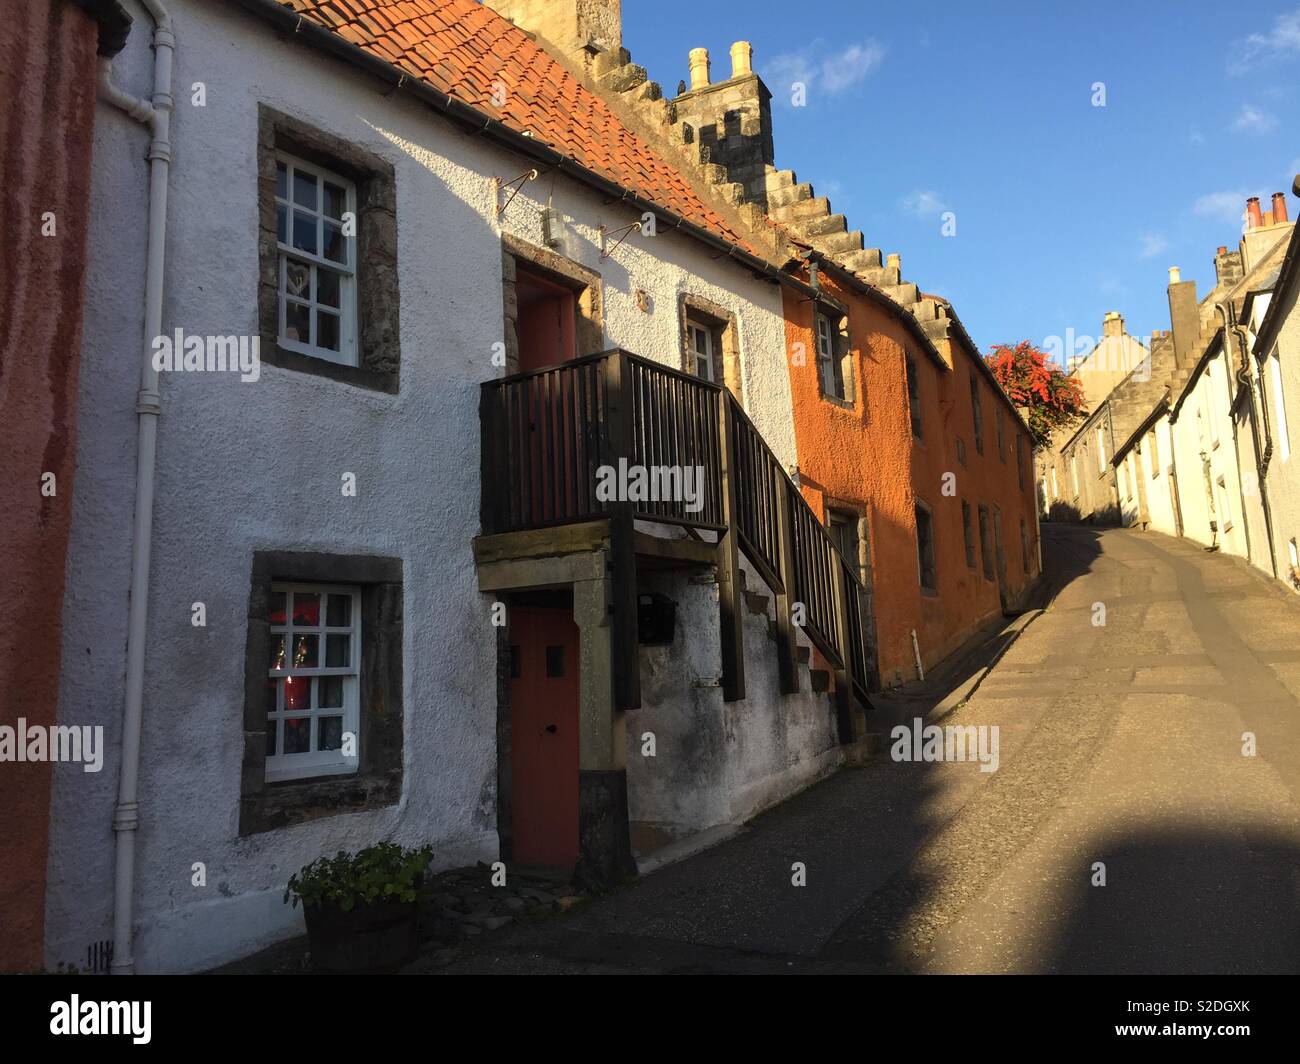 Historic street with old houses in Culross, Fife, Scotland - Outlander location Stock Photo